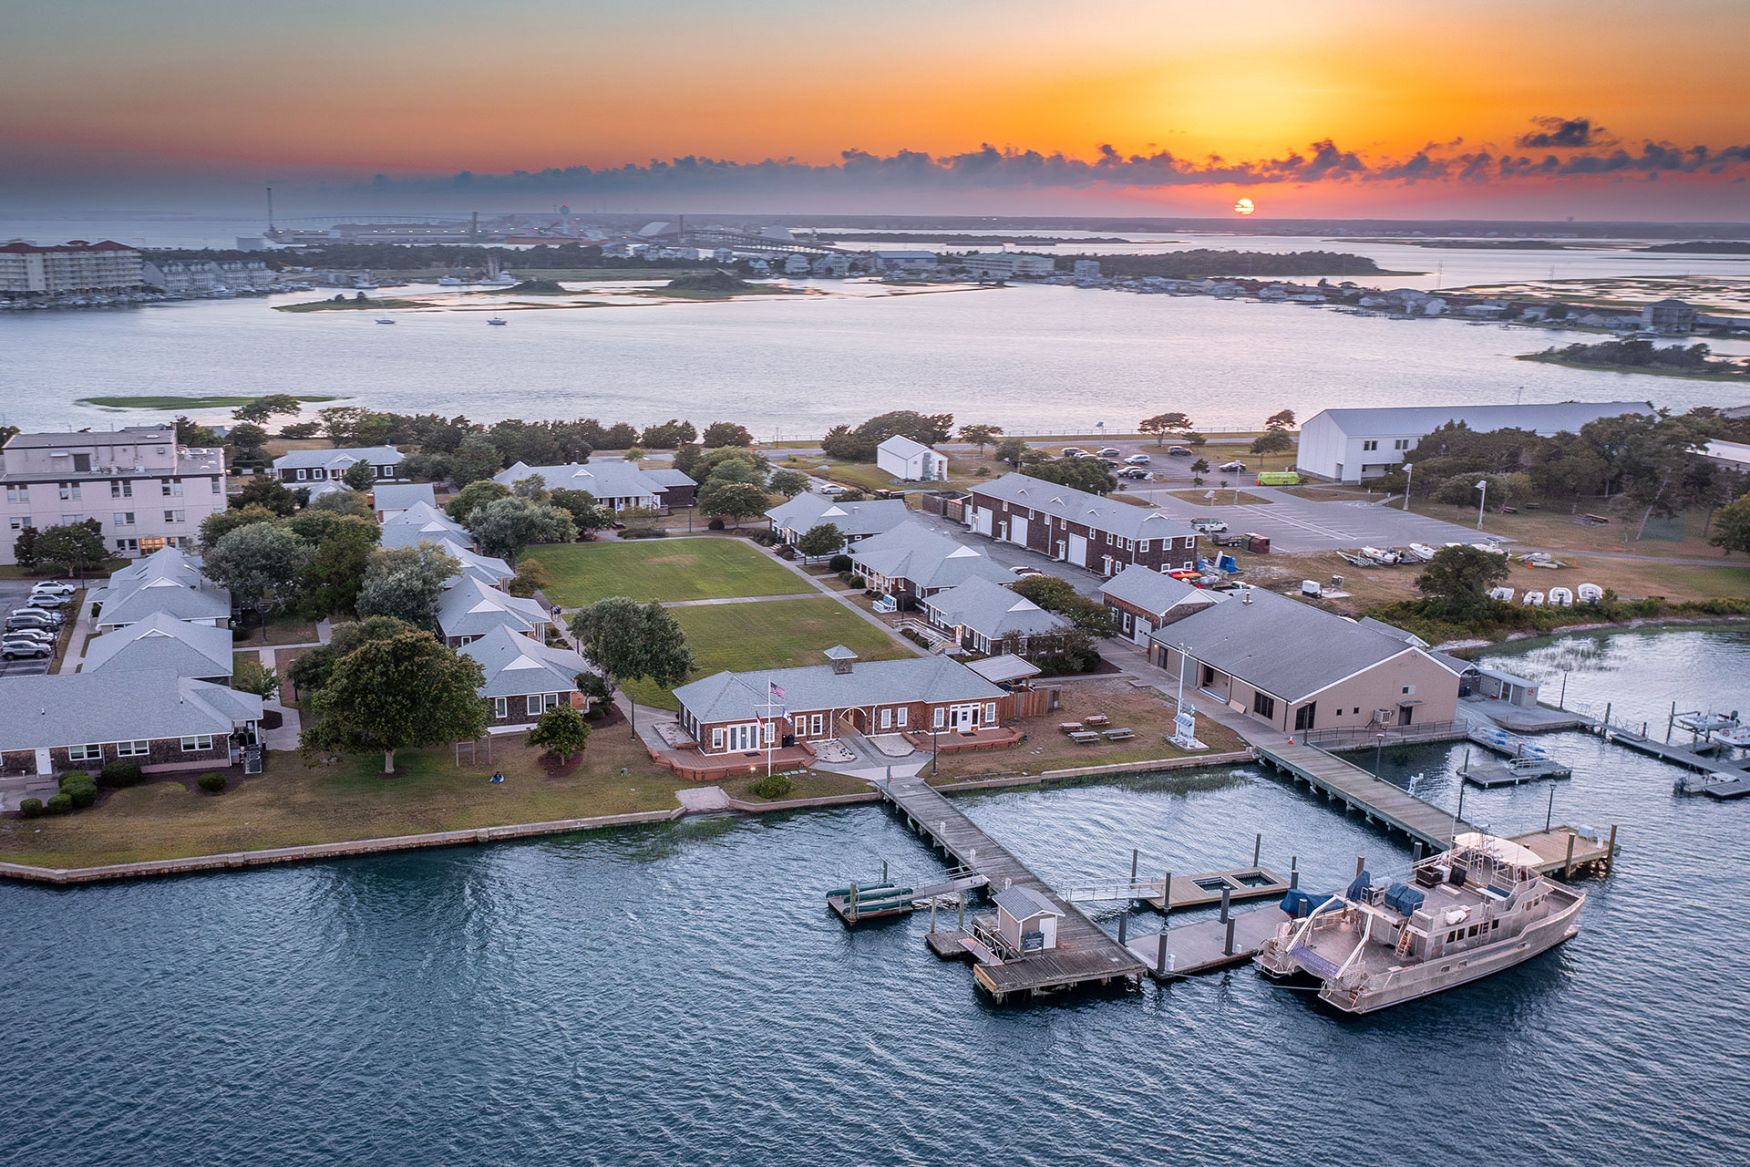 An aerial of the Duke University Marine lab campus with sunset in the background